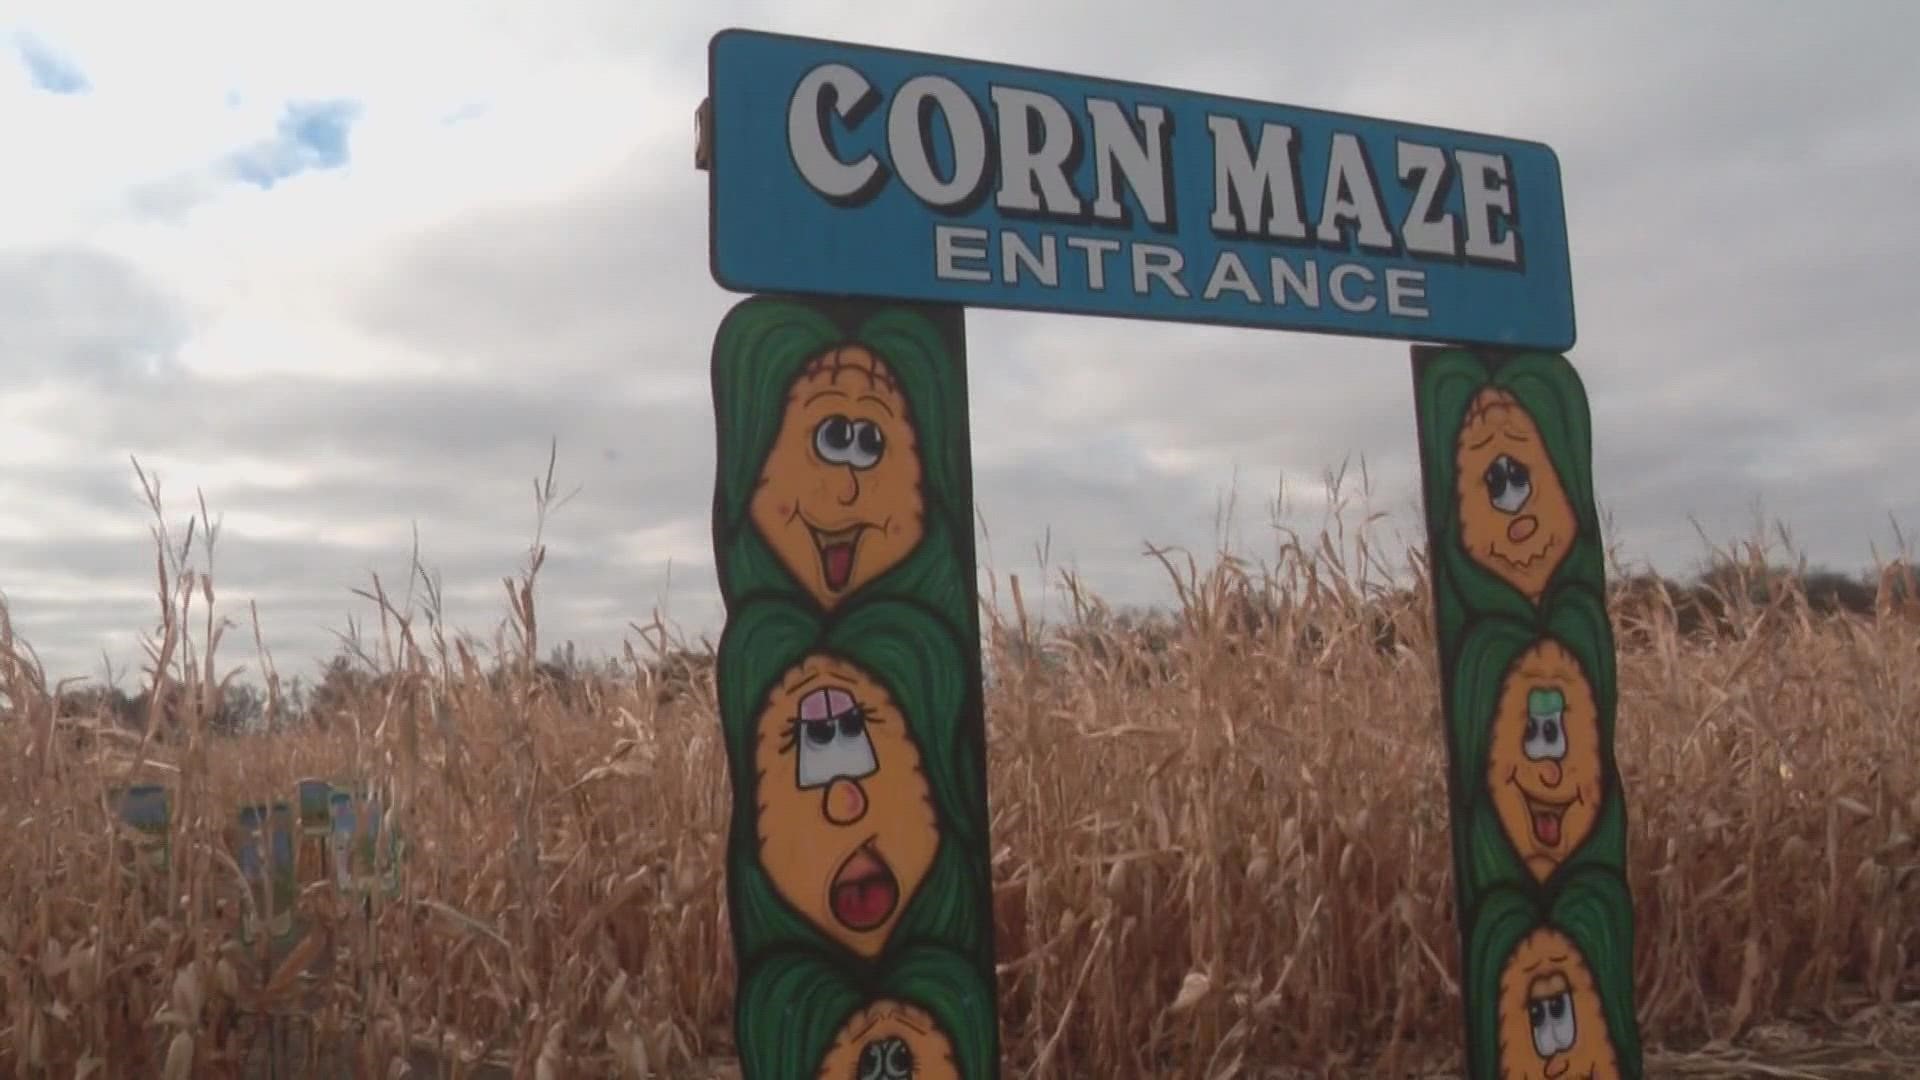 The Maize at Little Darby Creek, which is located in Union County’s Milford Center, is ending its 21st year.